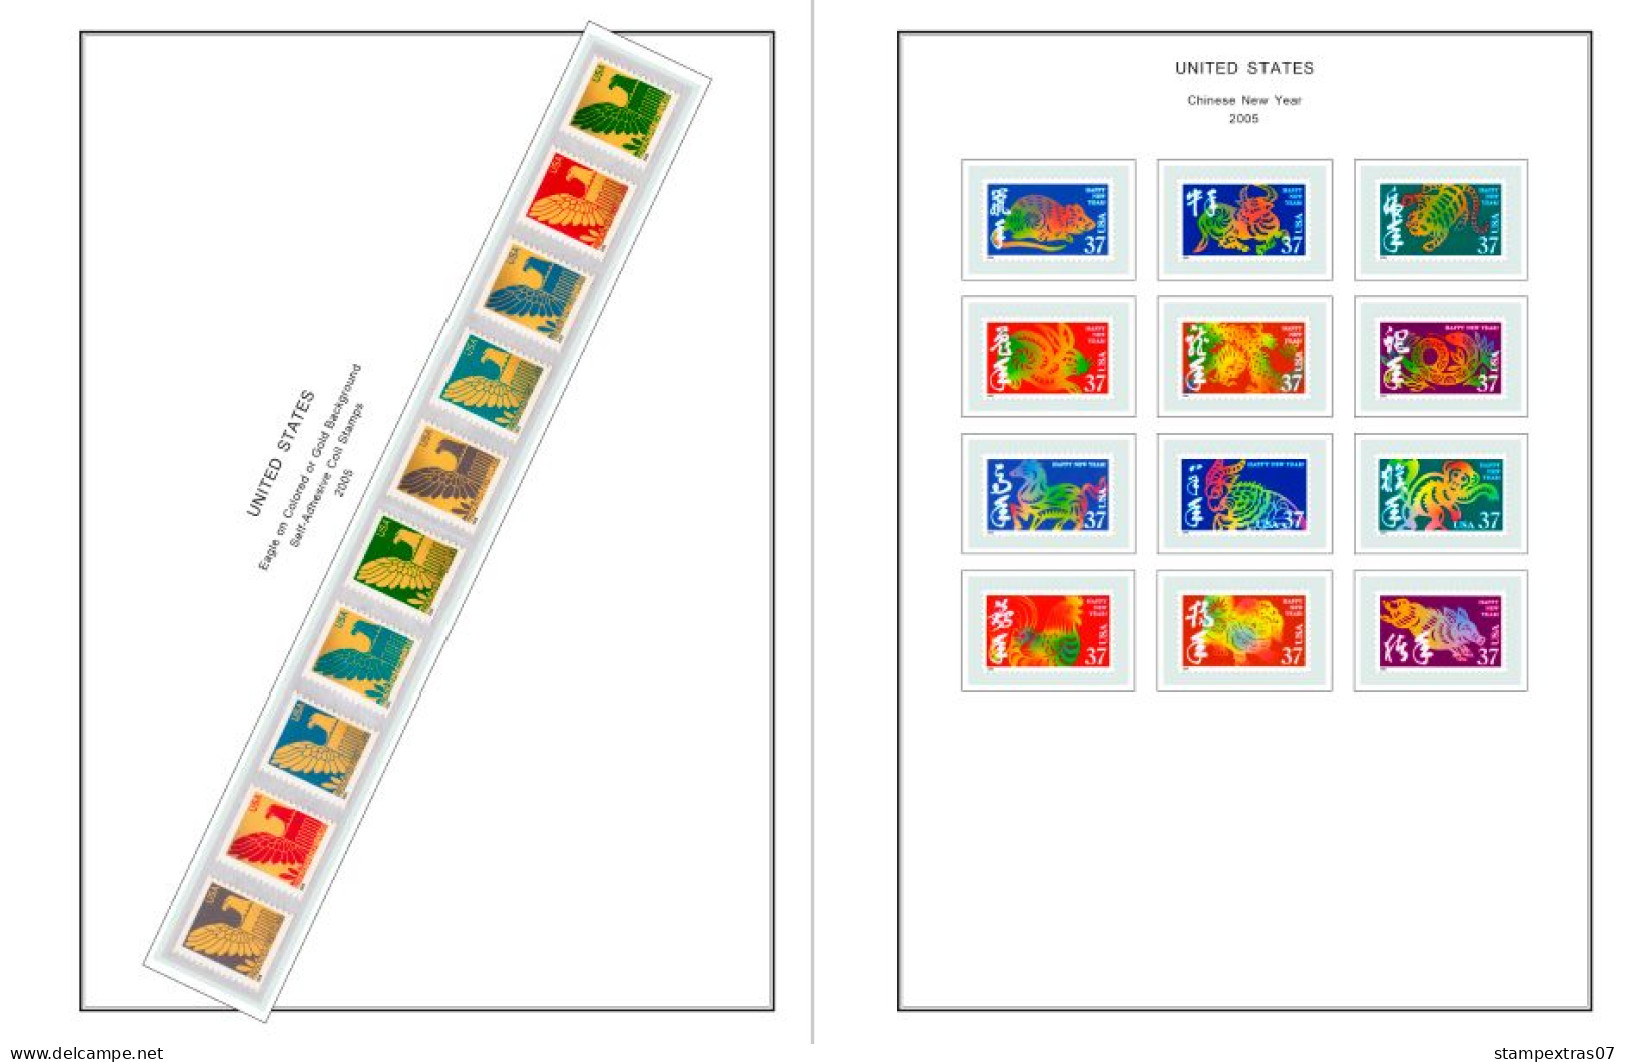 COLOR PRINTED USA 2005-2010 STAMP ALBUM PAGES (90 Illustrated Pages) >> FEUILLES ALBUM - Afgedrukte Pagina's